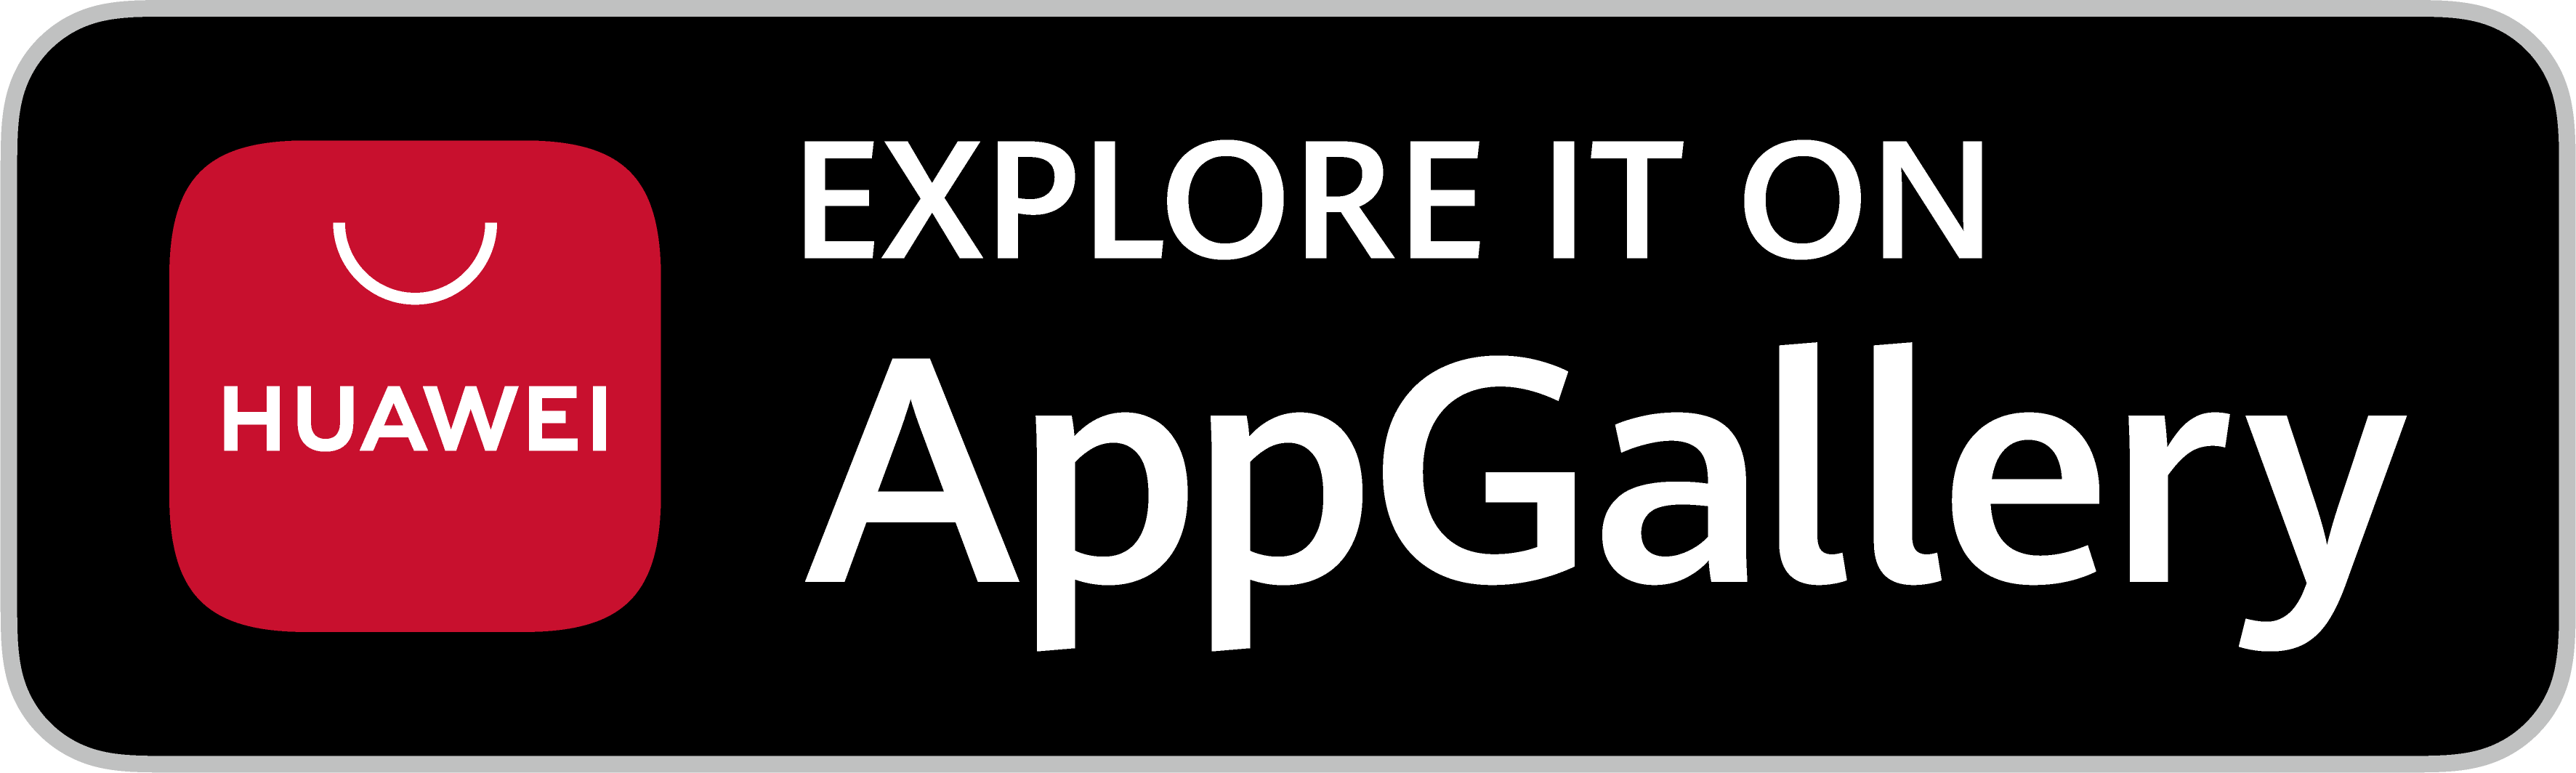 Explore it on Huawei AppGallery